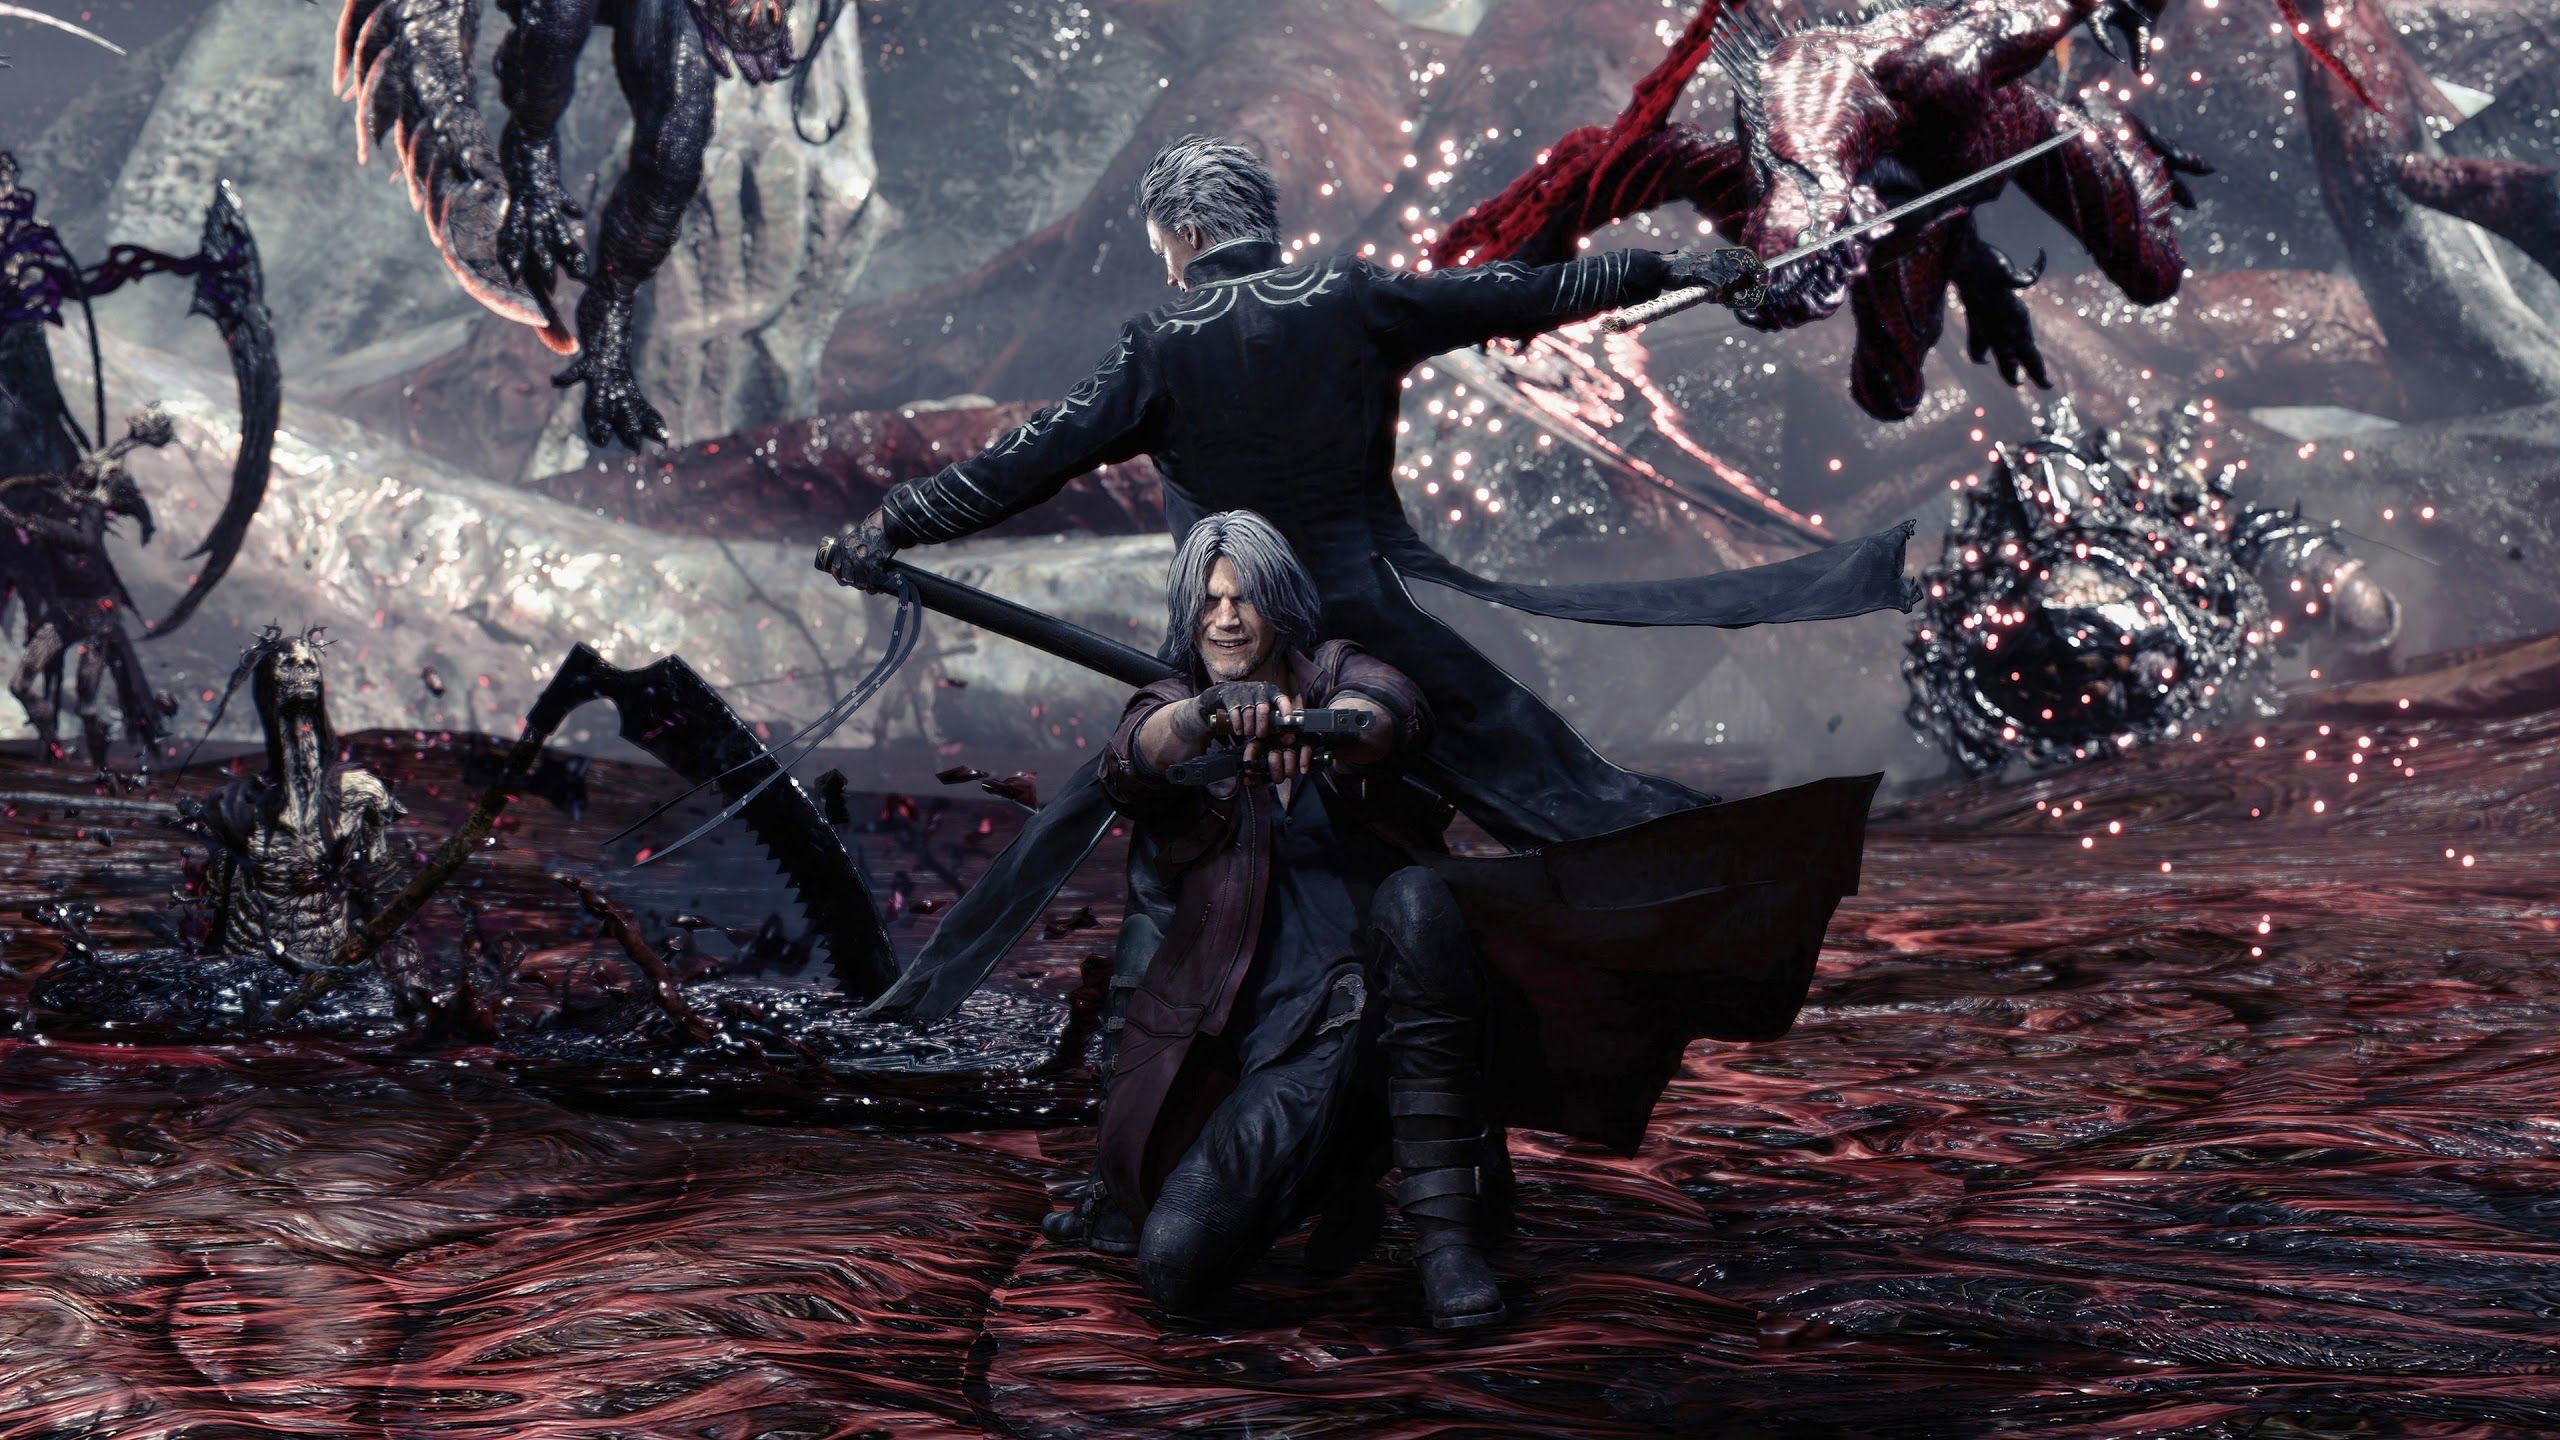 Devil May Cry 5 Vergil Wallpaper Free Devil May Cry 5 Vergil Background